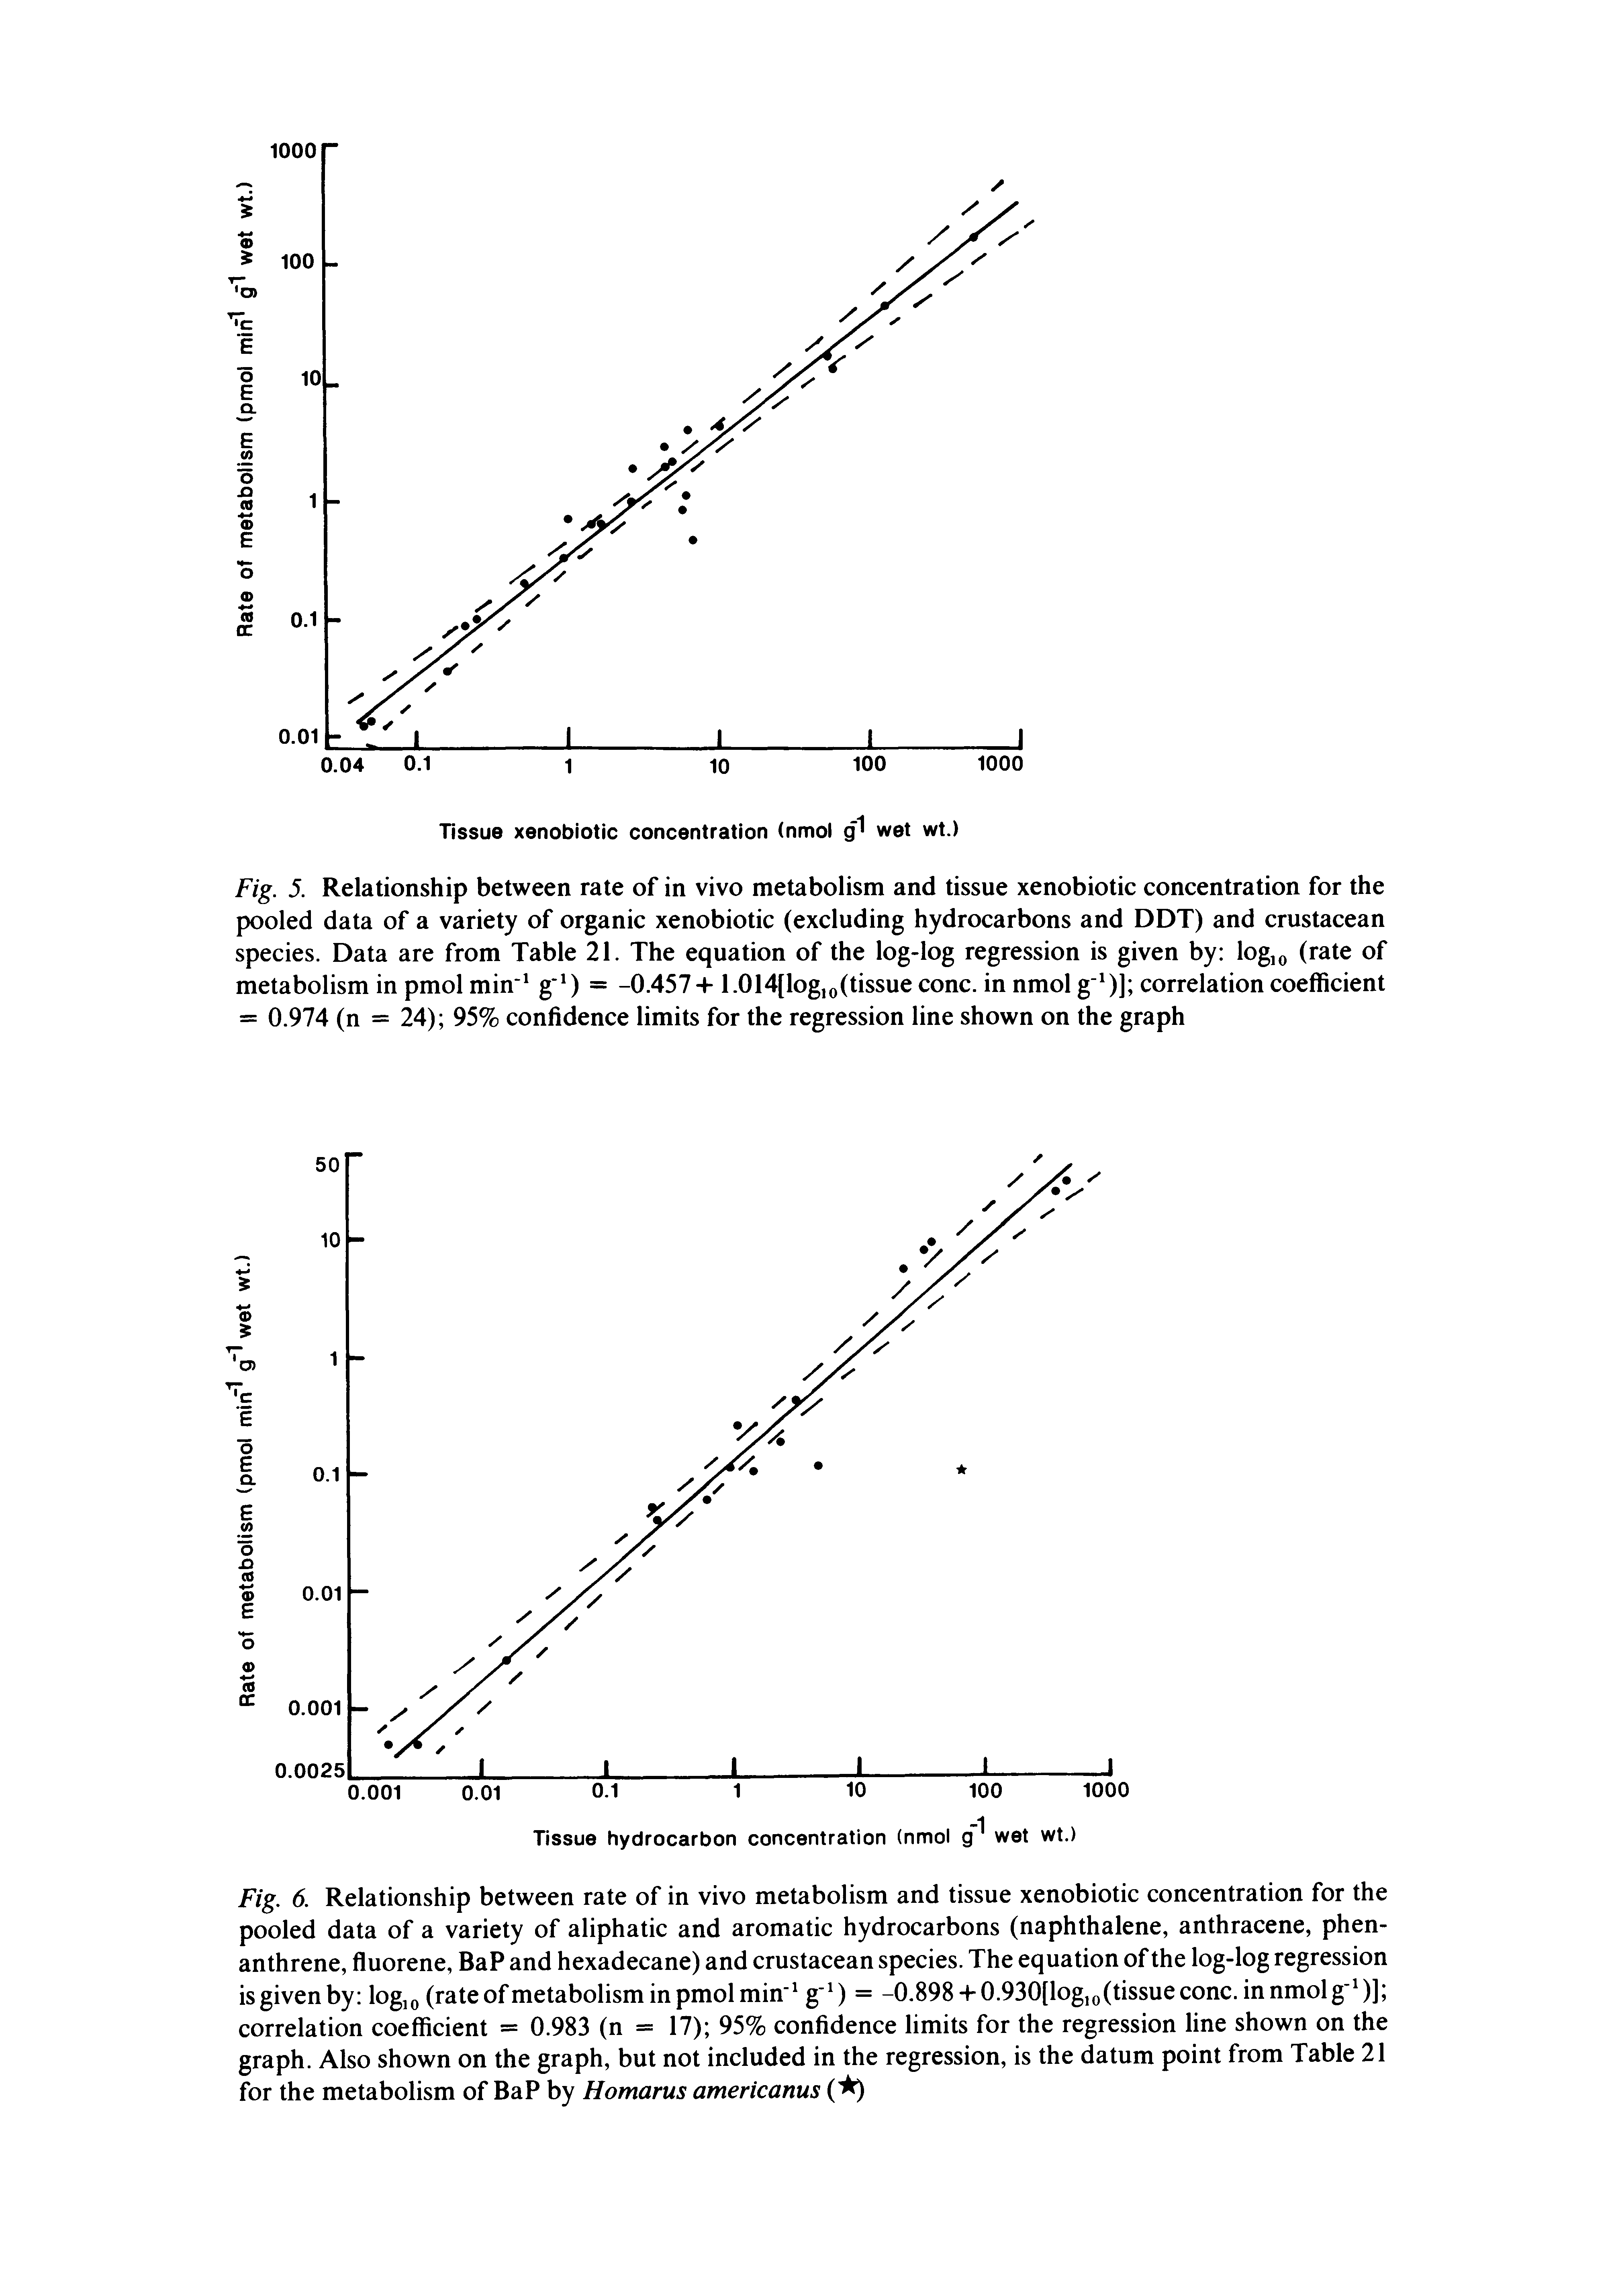 Fig. 5. Relationship between rate of in vivo metabolism and tissue xenobiotic concentration for the pooled data of a variety of organic xenobiotic (excluding hydrocarbons and DDT) and crustacean species. Data are from Table 21. The equation of the log-log regression is given by log,o (rate of metabolism in pmol min g ) = -0.4571.014[log,o(tissue cone, in nmol g )] correlation coefficient = 0.974 (n = 24) 95% confidence limits for the regression line shown on the graph...